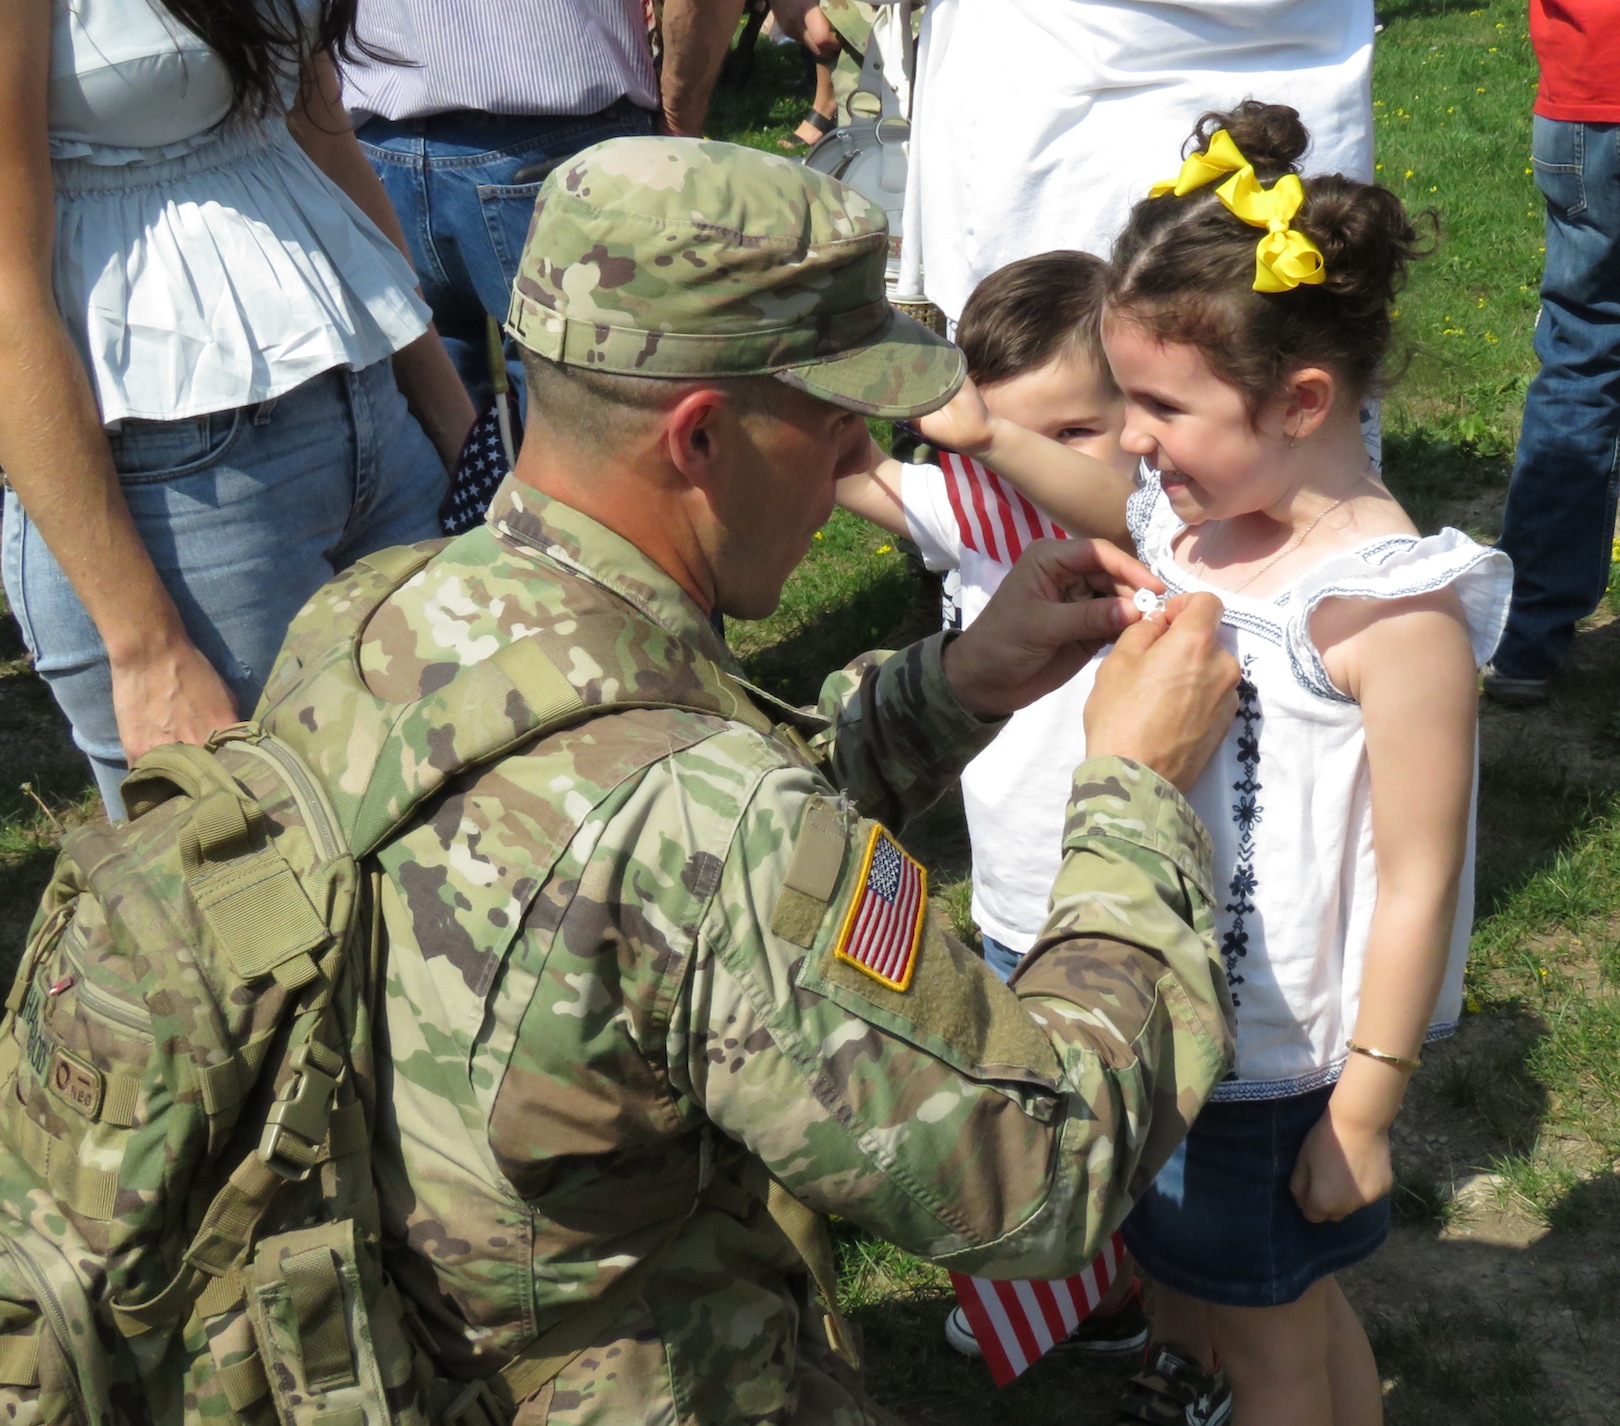 This little girl was quite happy to see her father return home. (Photo by David Yarger)